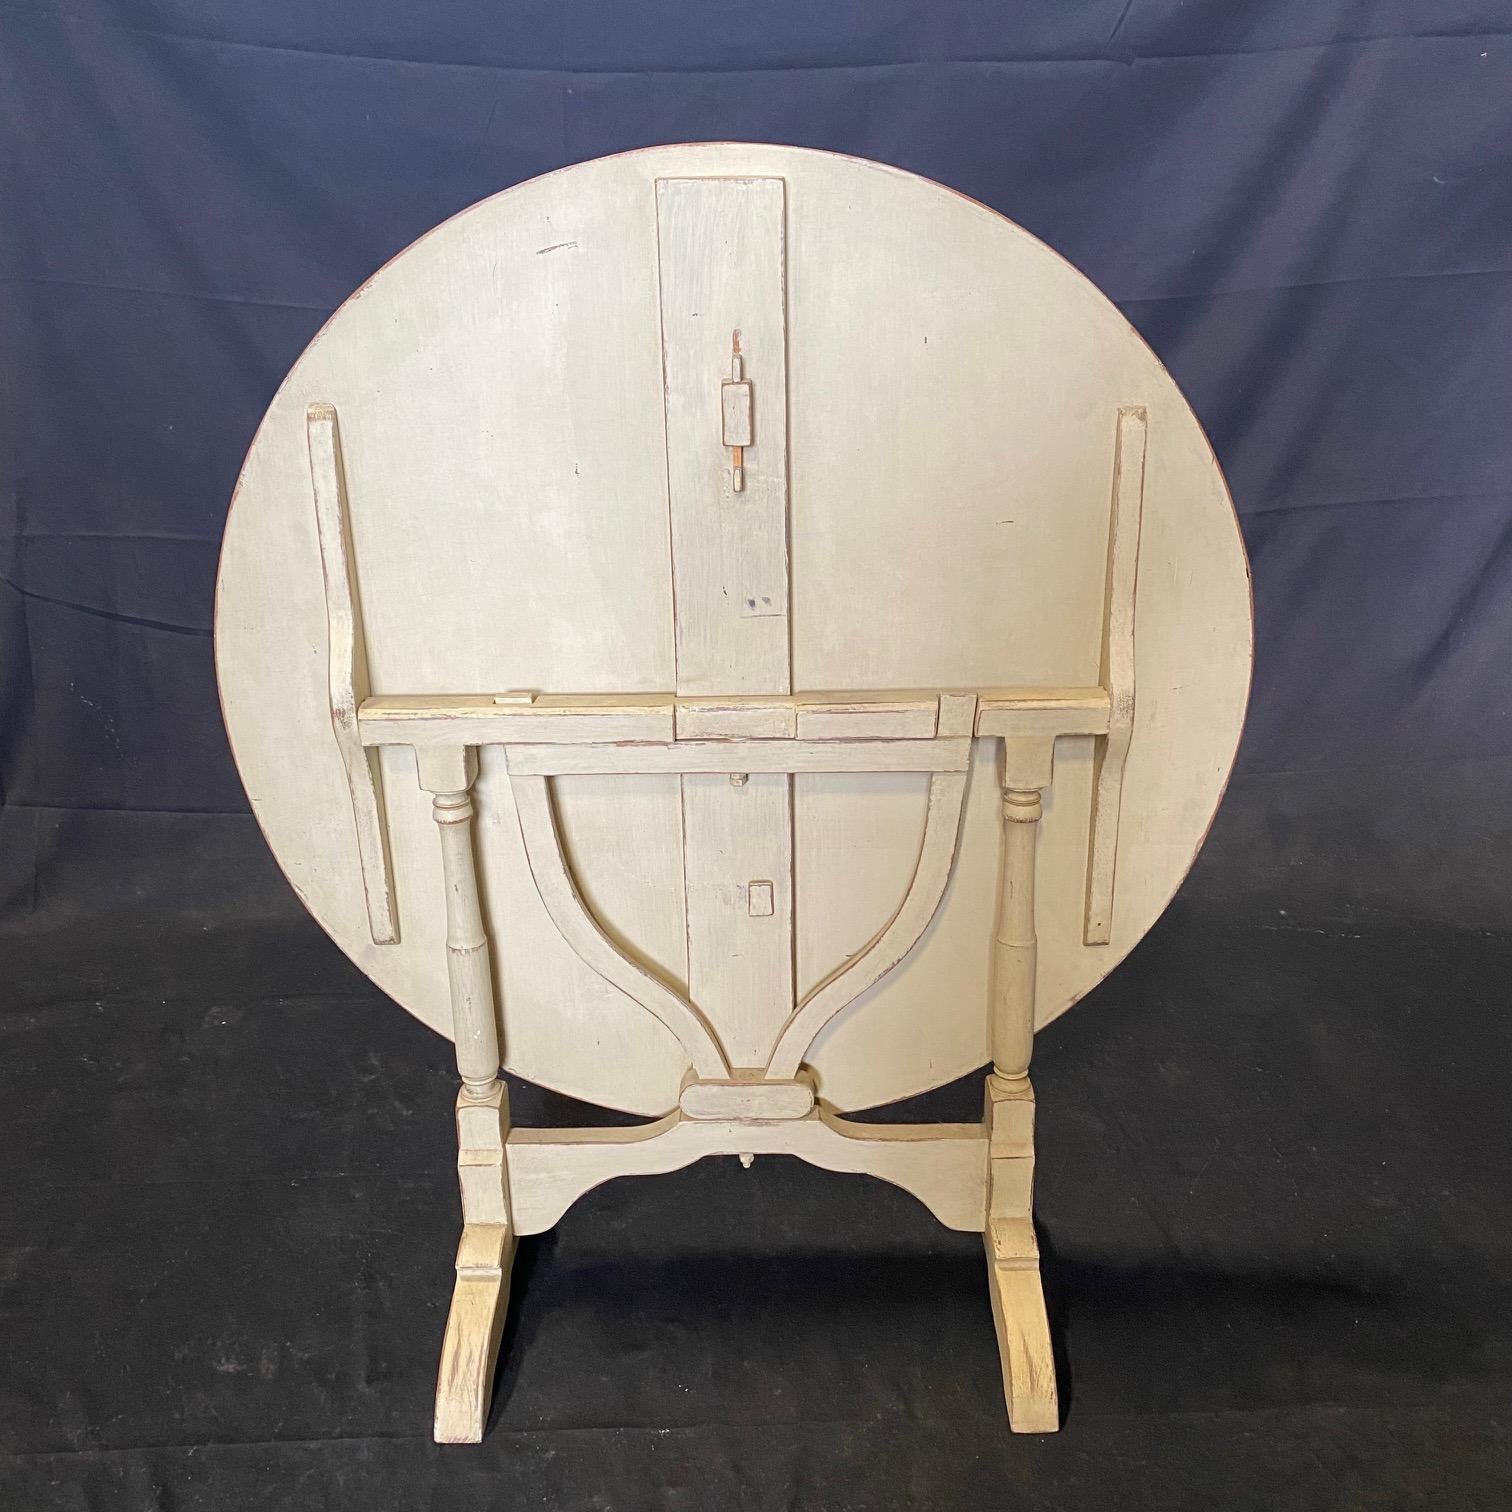 Versatile tilt top French vintage wine tasting table.  Great as a side table or small dining table.  This one is painted an antiqued white.
Apron 25.75 h
Closed with top in upright position  42.25 H 16.5 D
#3060

